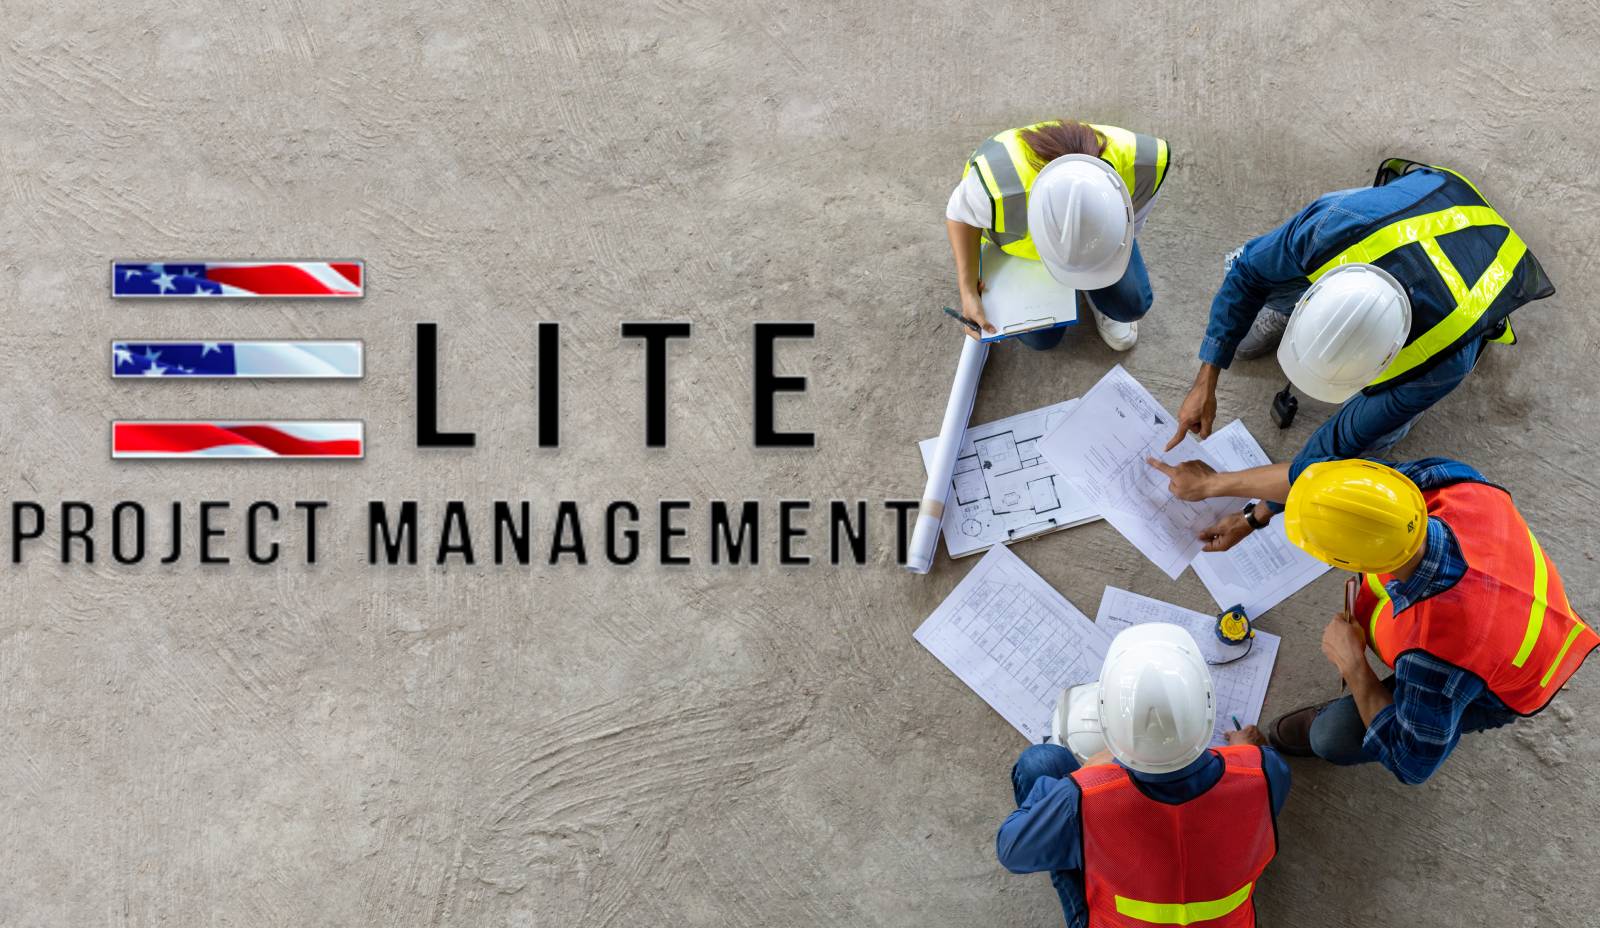 Transforming Workforce Management and Cost Reporting with EZTRAK at Elite Project Management, LLC